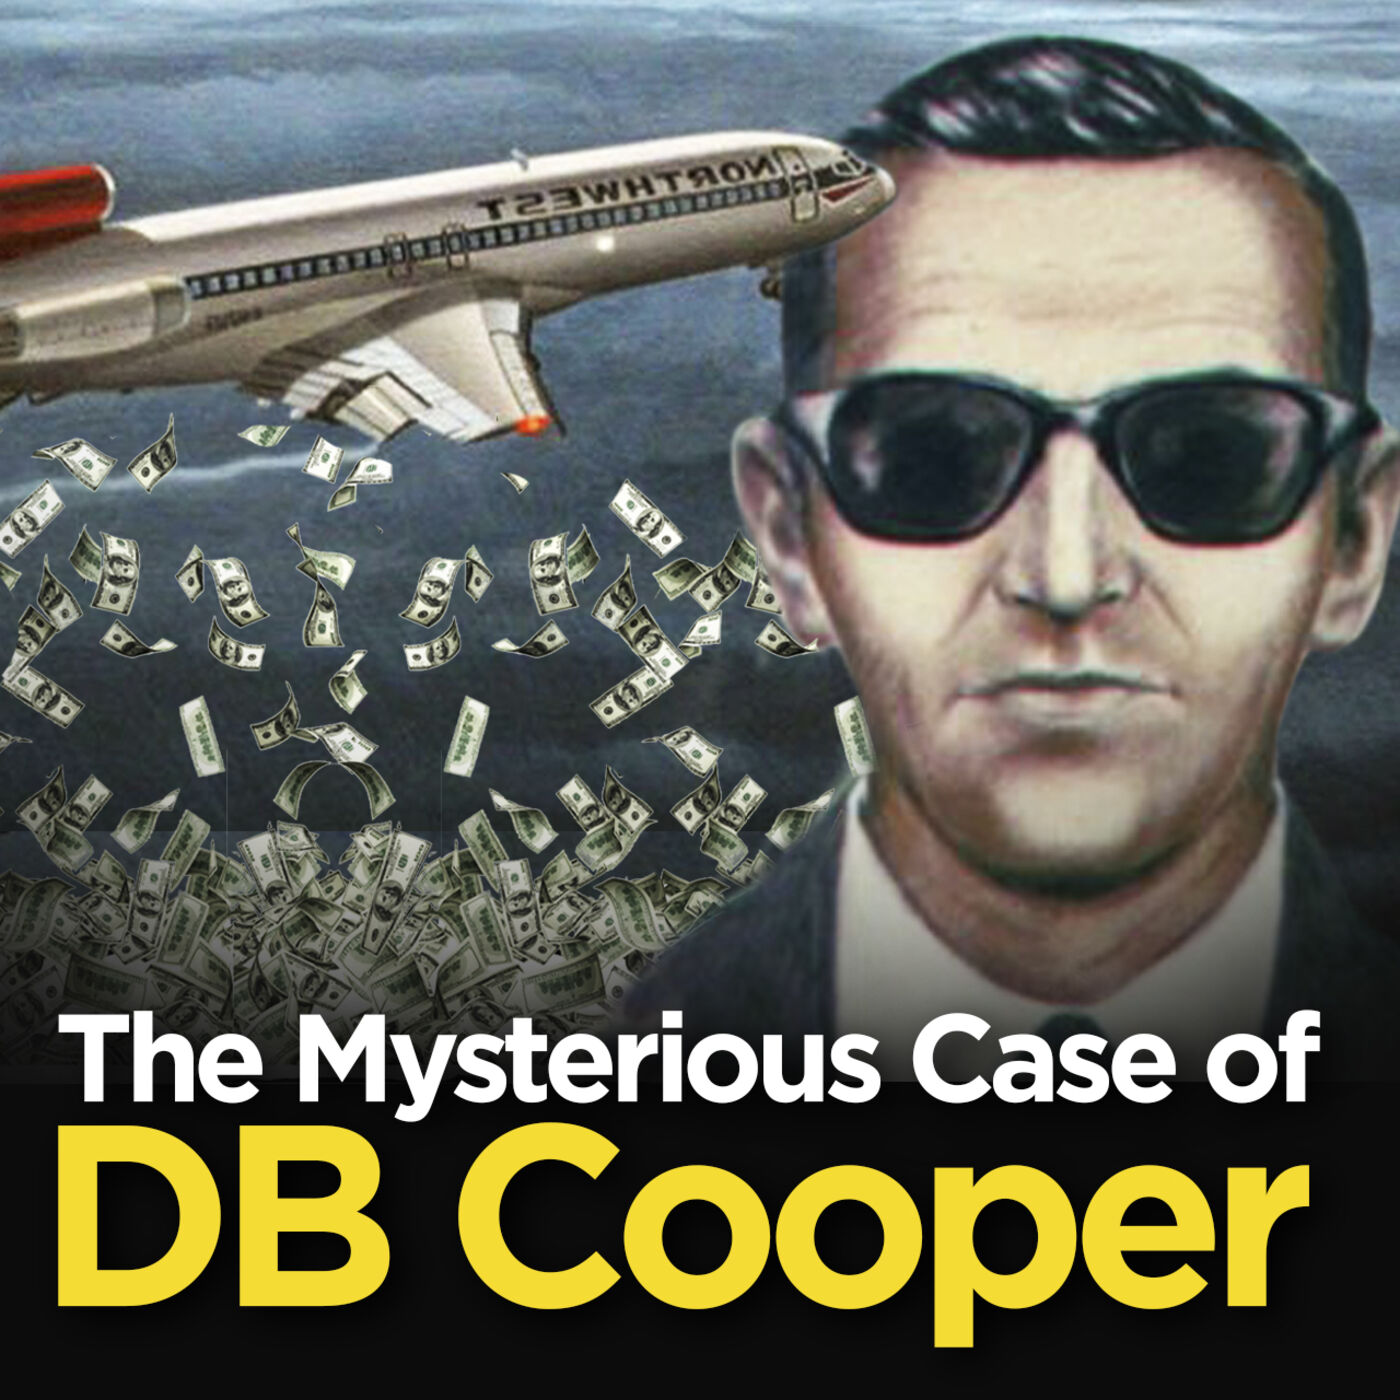 An air hijacking with an unbelievable ending | DB Cooper